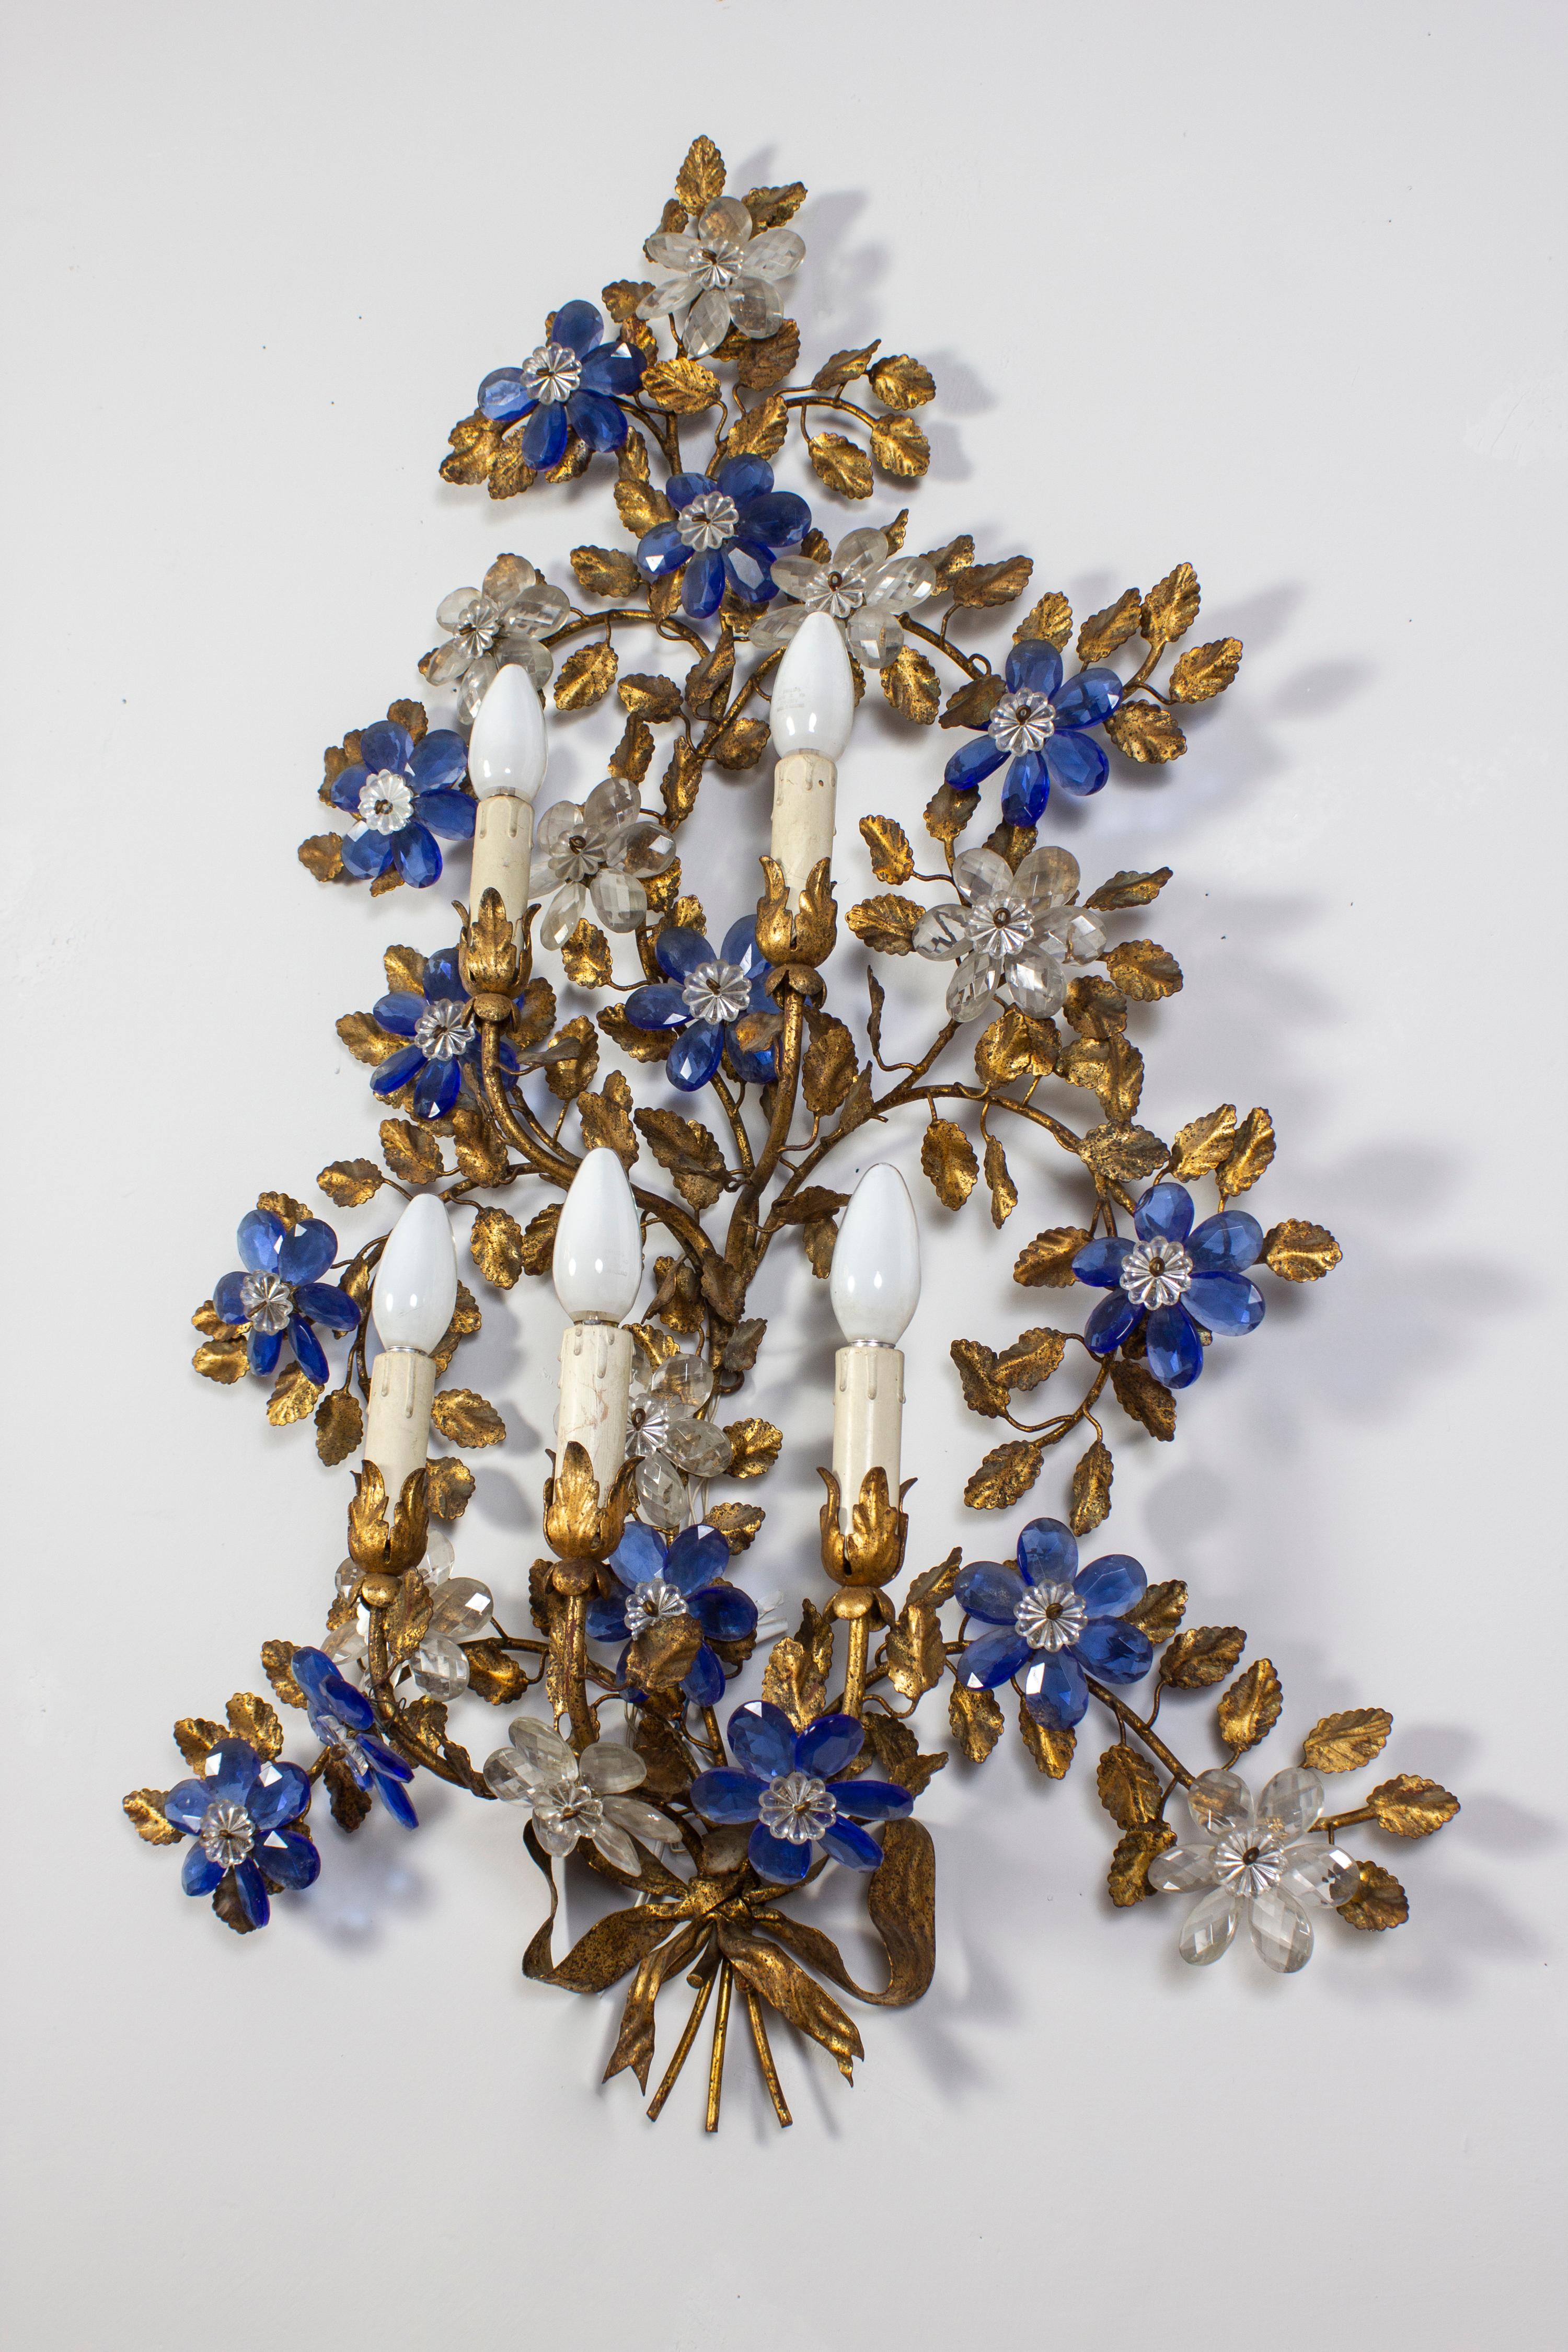 Amazing Pair of  Italian vintage  5-light  sconces  by Banci, manufactured by Banci Firenze in 1970s
Gilt metal  structure decorated with 5 arms ending with candle holders. Blue and clear flower shape glass flowers .
 Very good vintage condition,